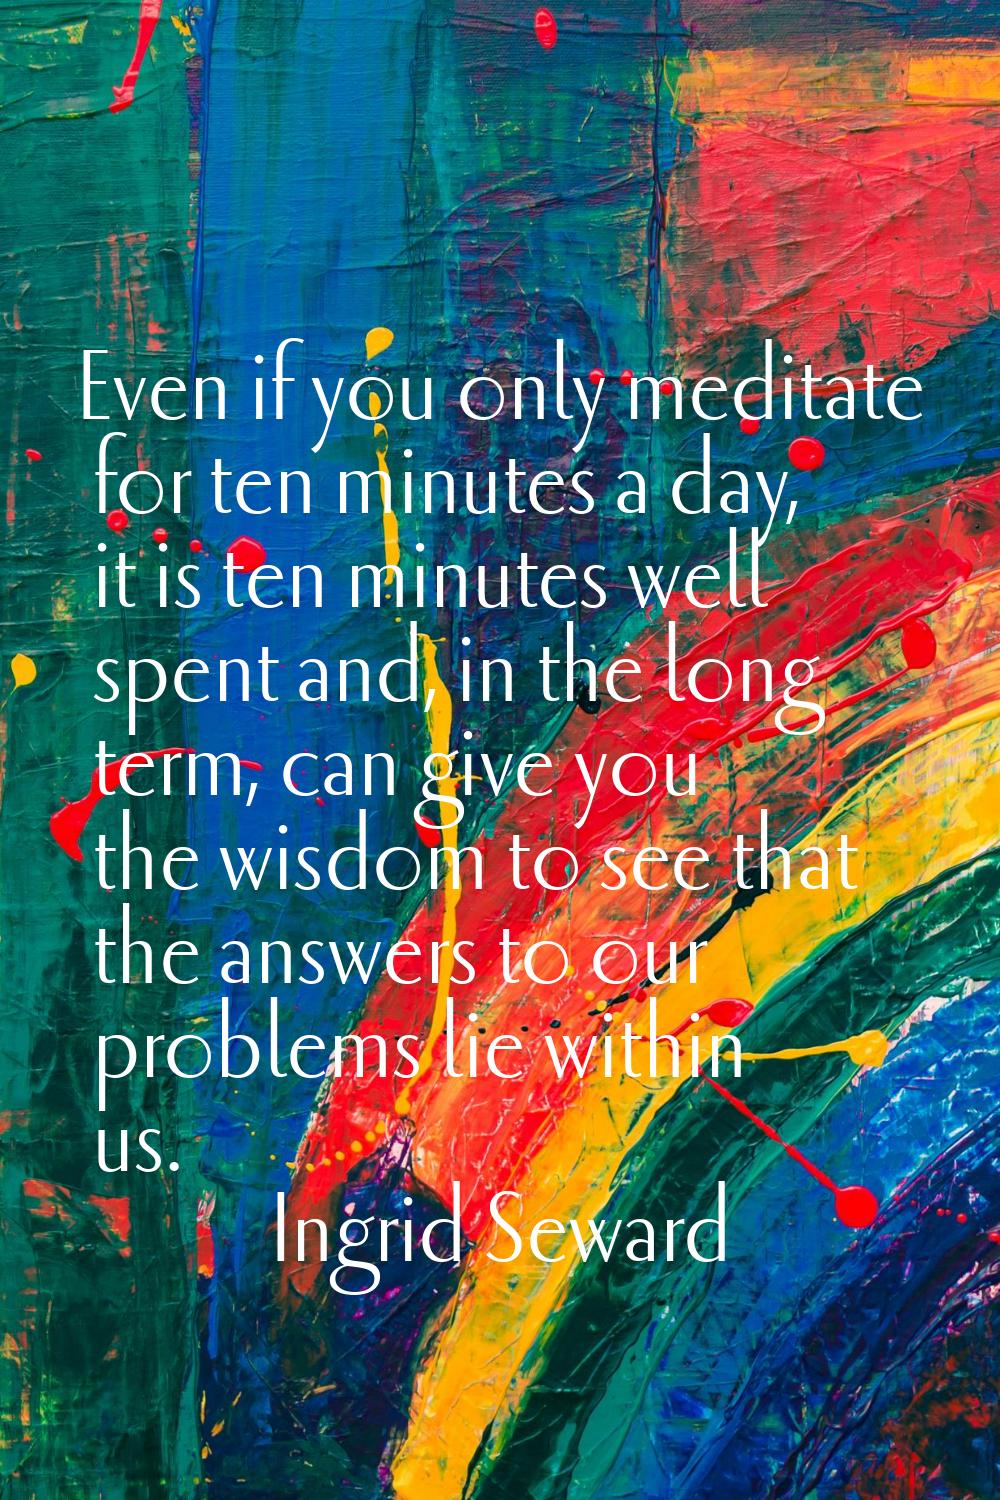 Even if you only meditate for ten minutes a day, it is ten minutes well spent and, in the long term